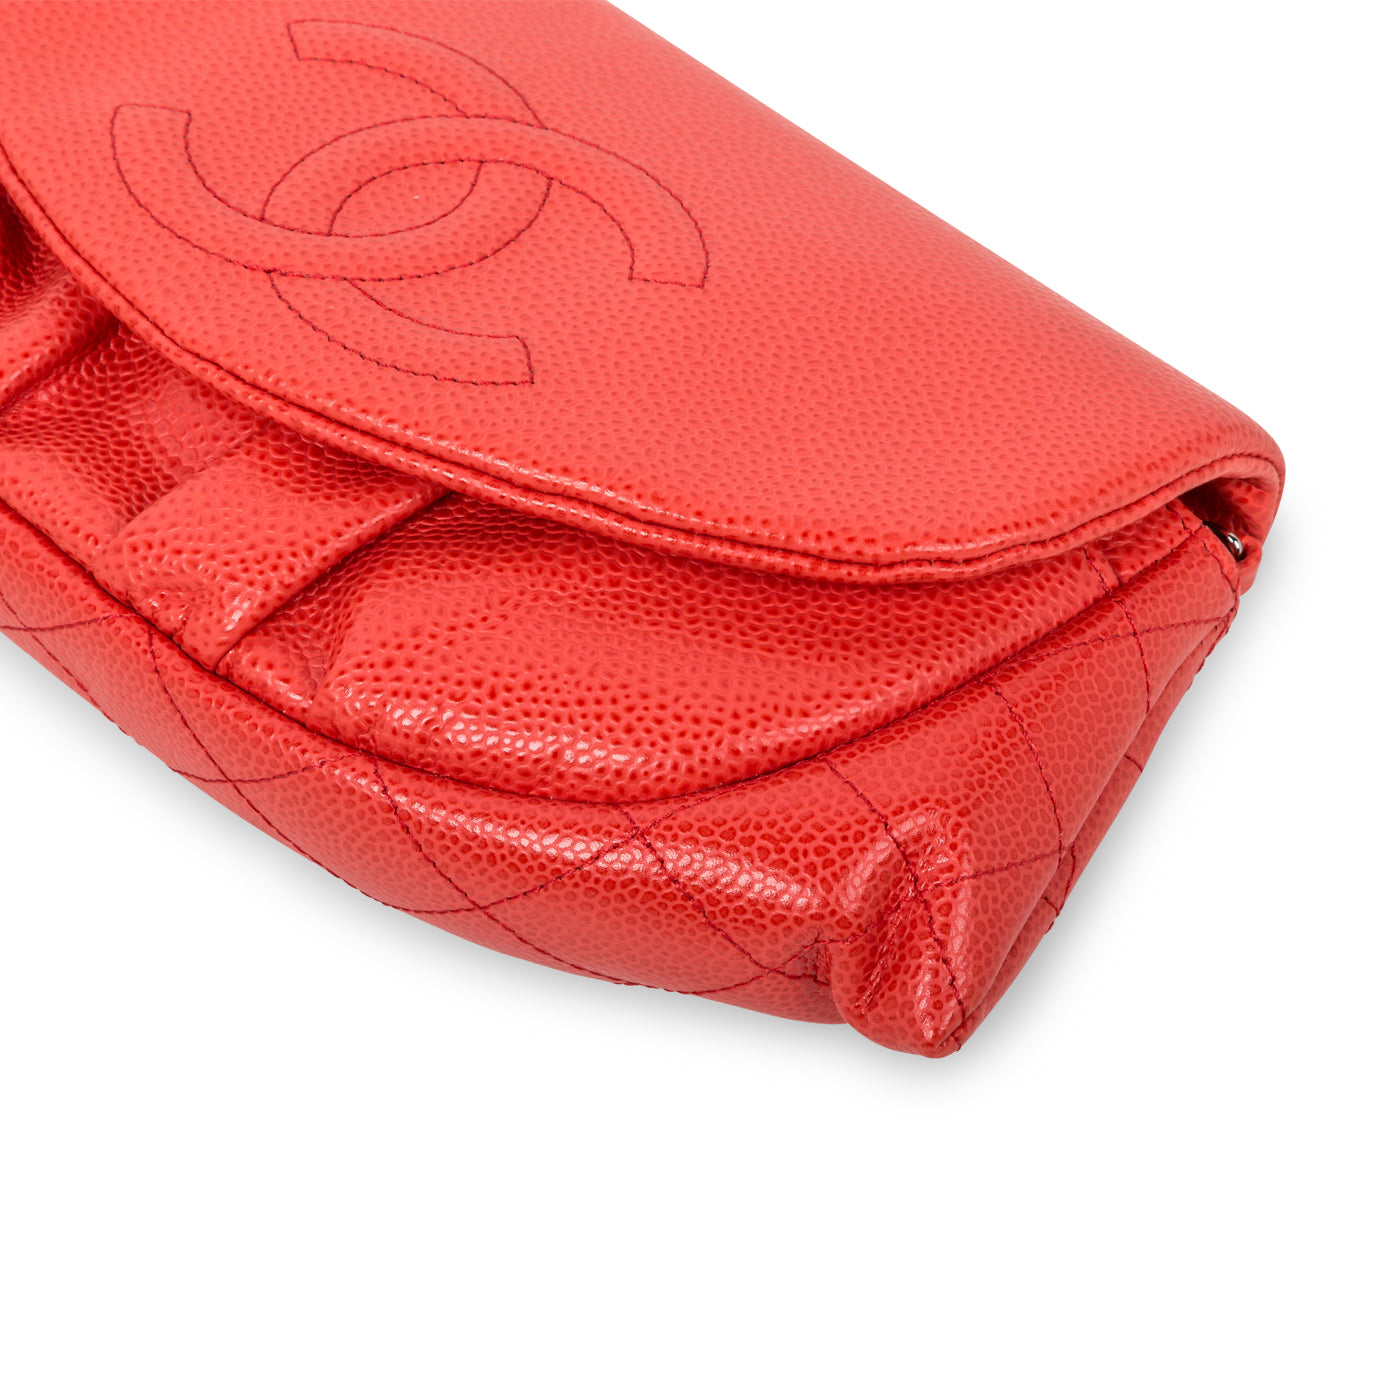 Chanel - Half Moon Wallet on Chain - Coral Red - Full Set